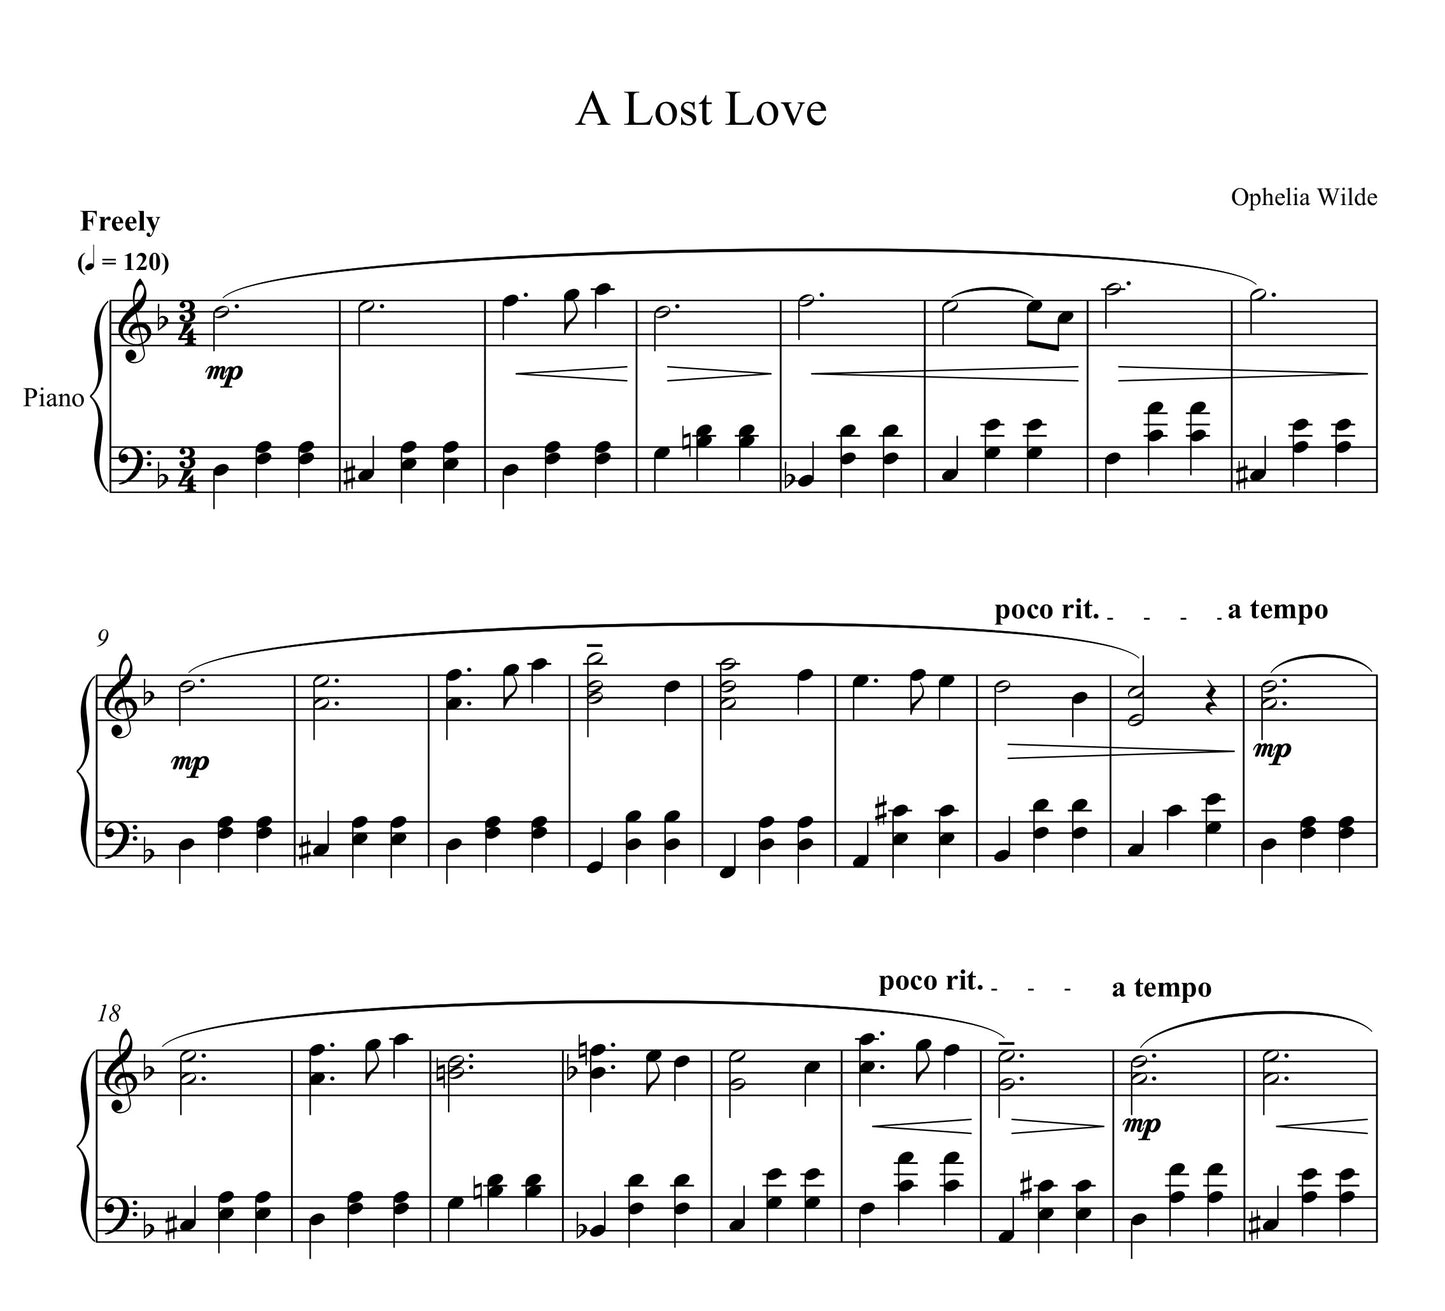 romance, reading & haunted libraries - Complete Album Piano Sheet Music